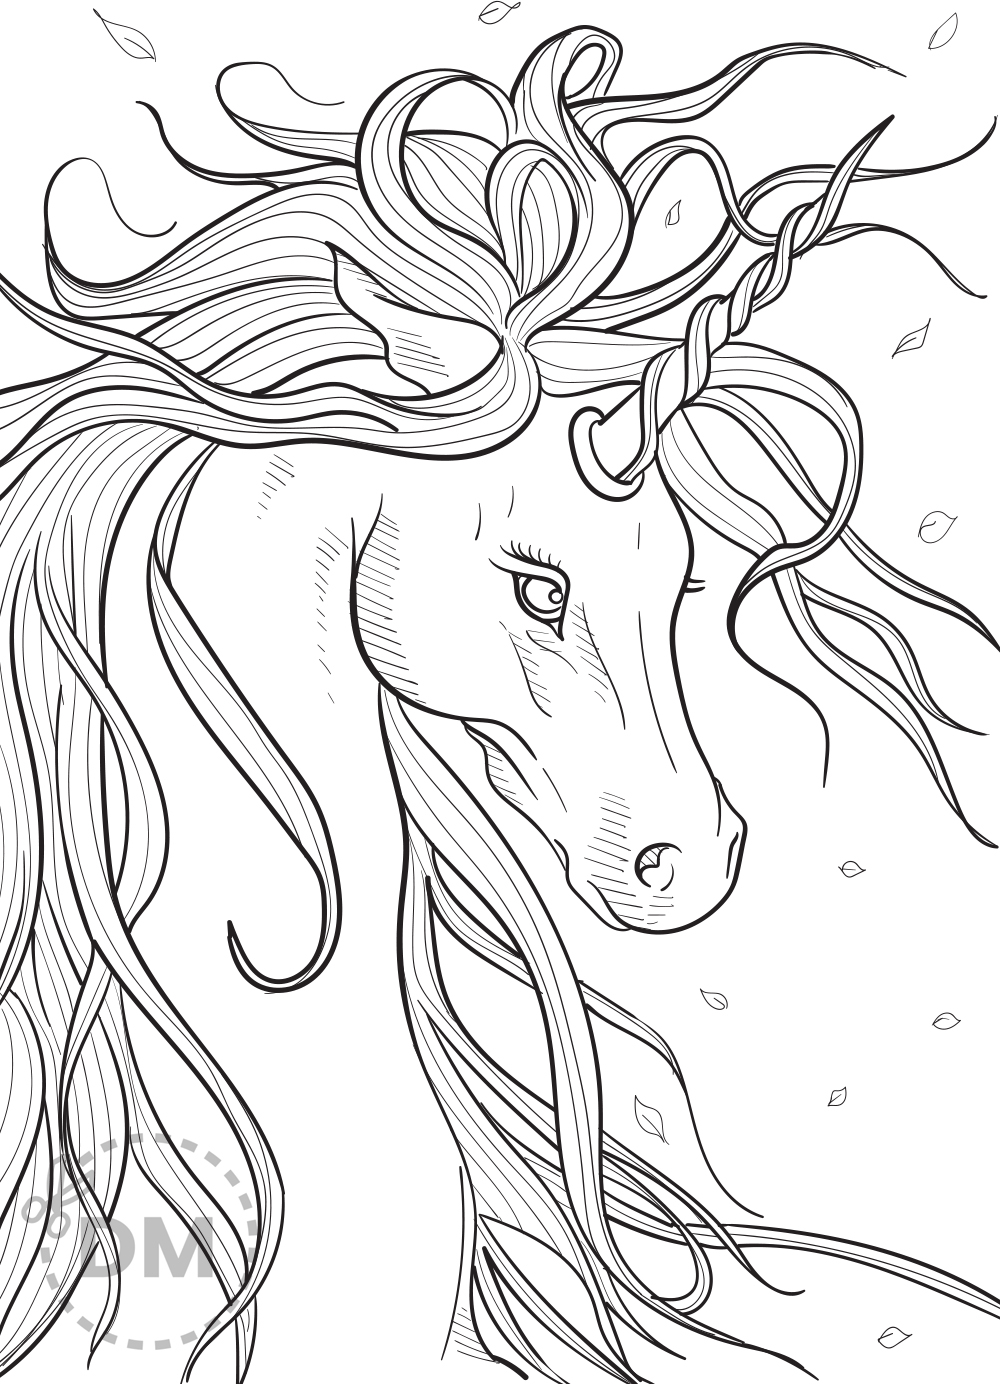 unicorn head coloring page for teens and adults diy magazine com